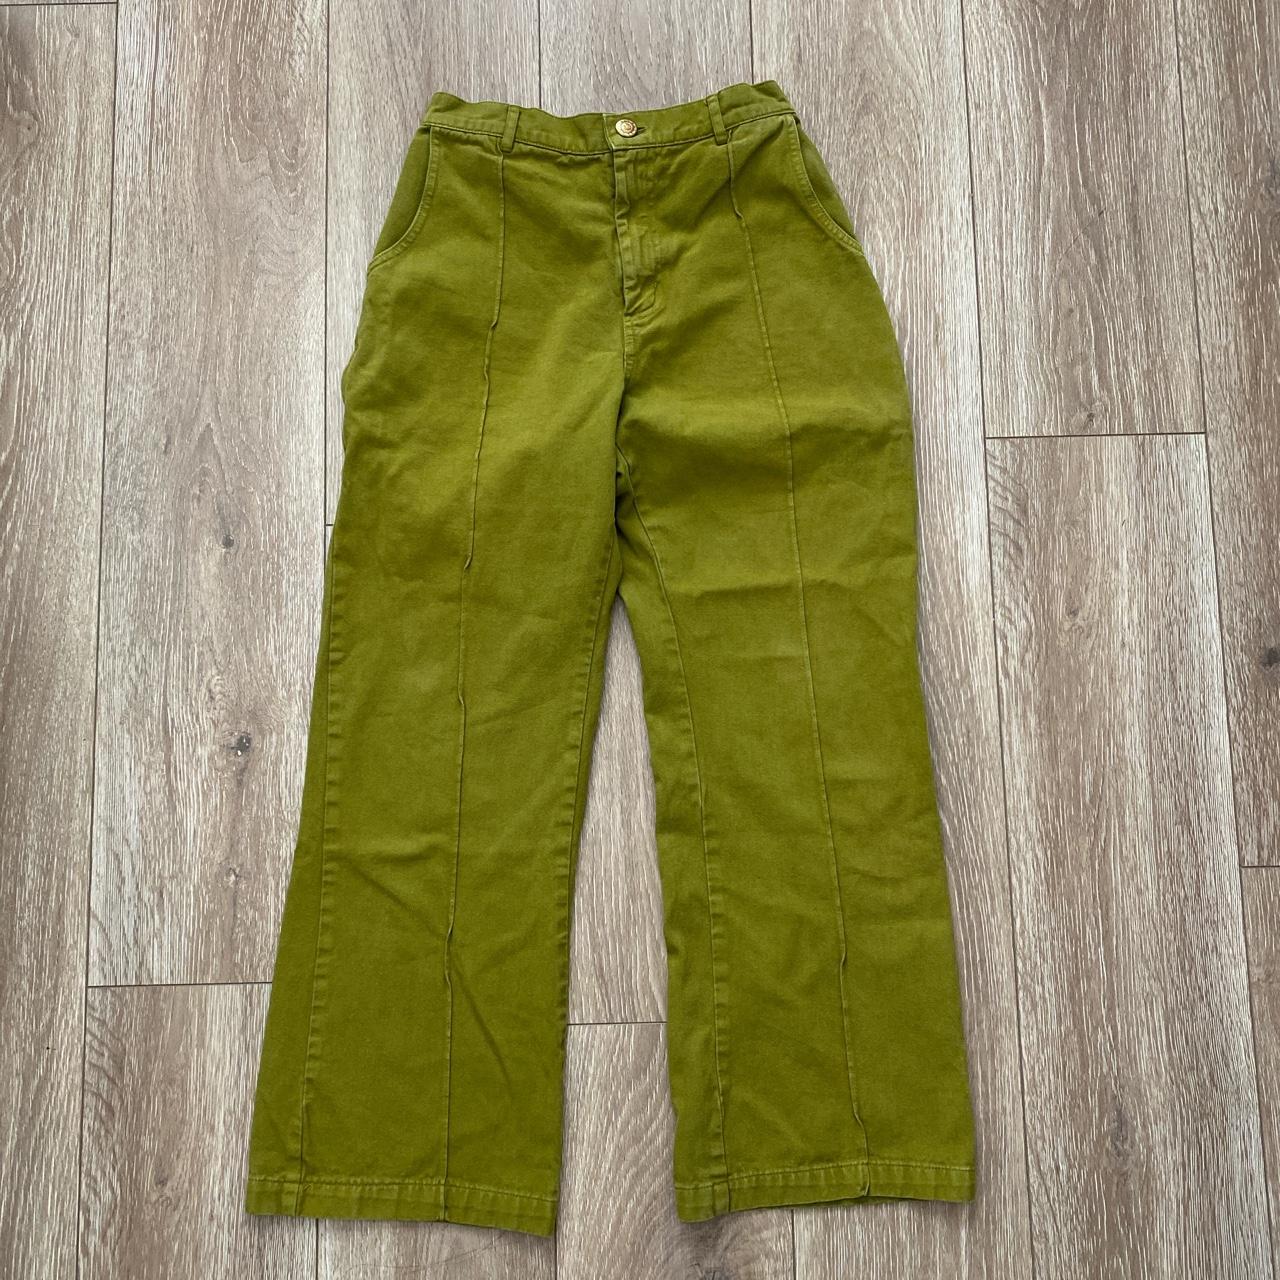 Big Bud Press Western Pants in Olive, size small ~... - Depop